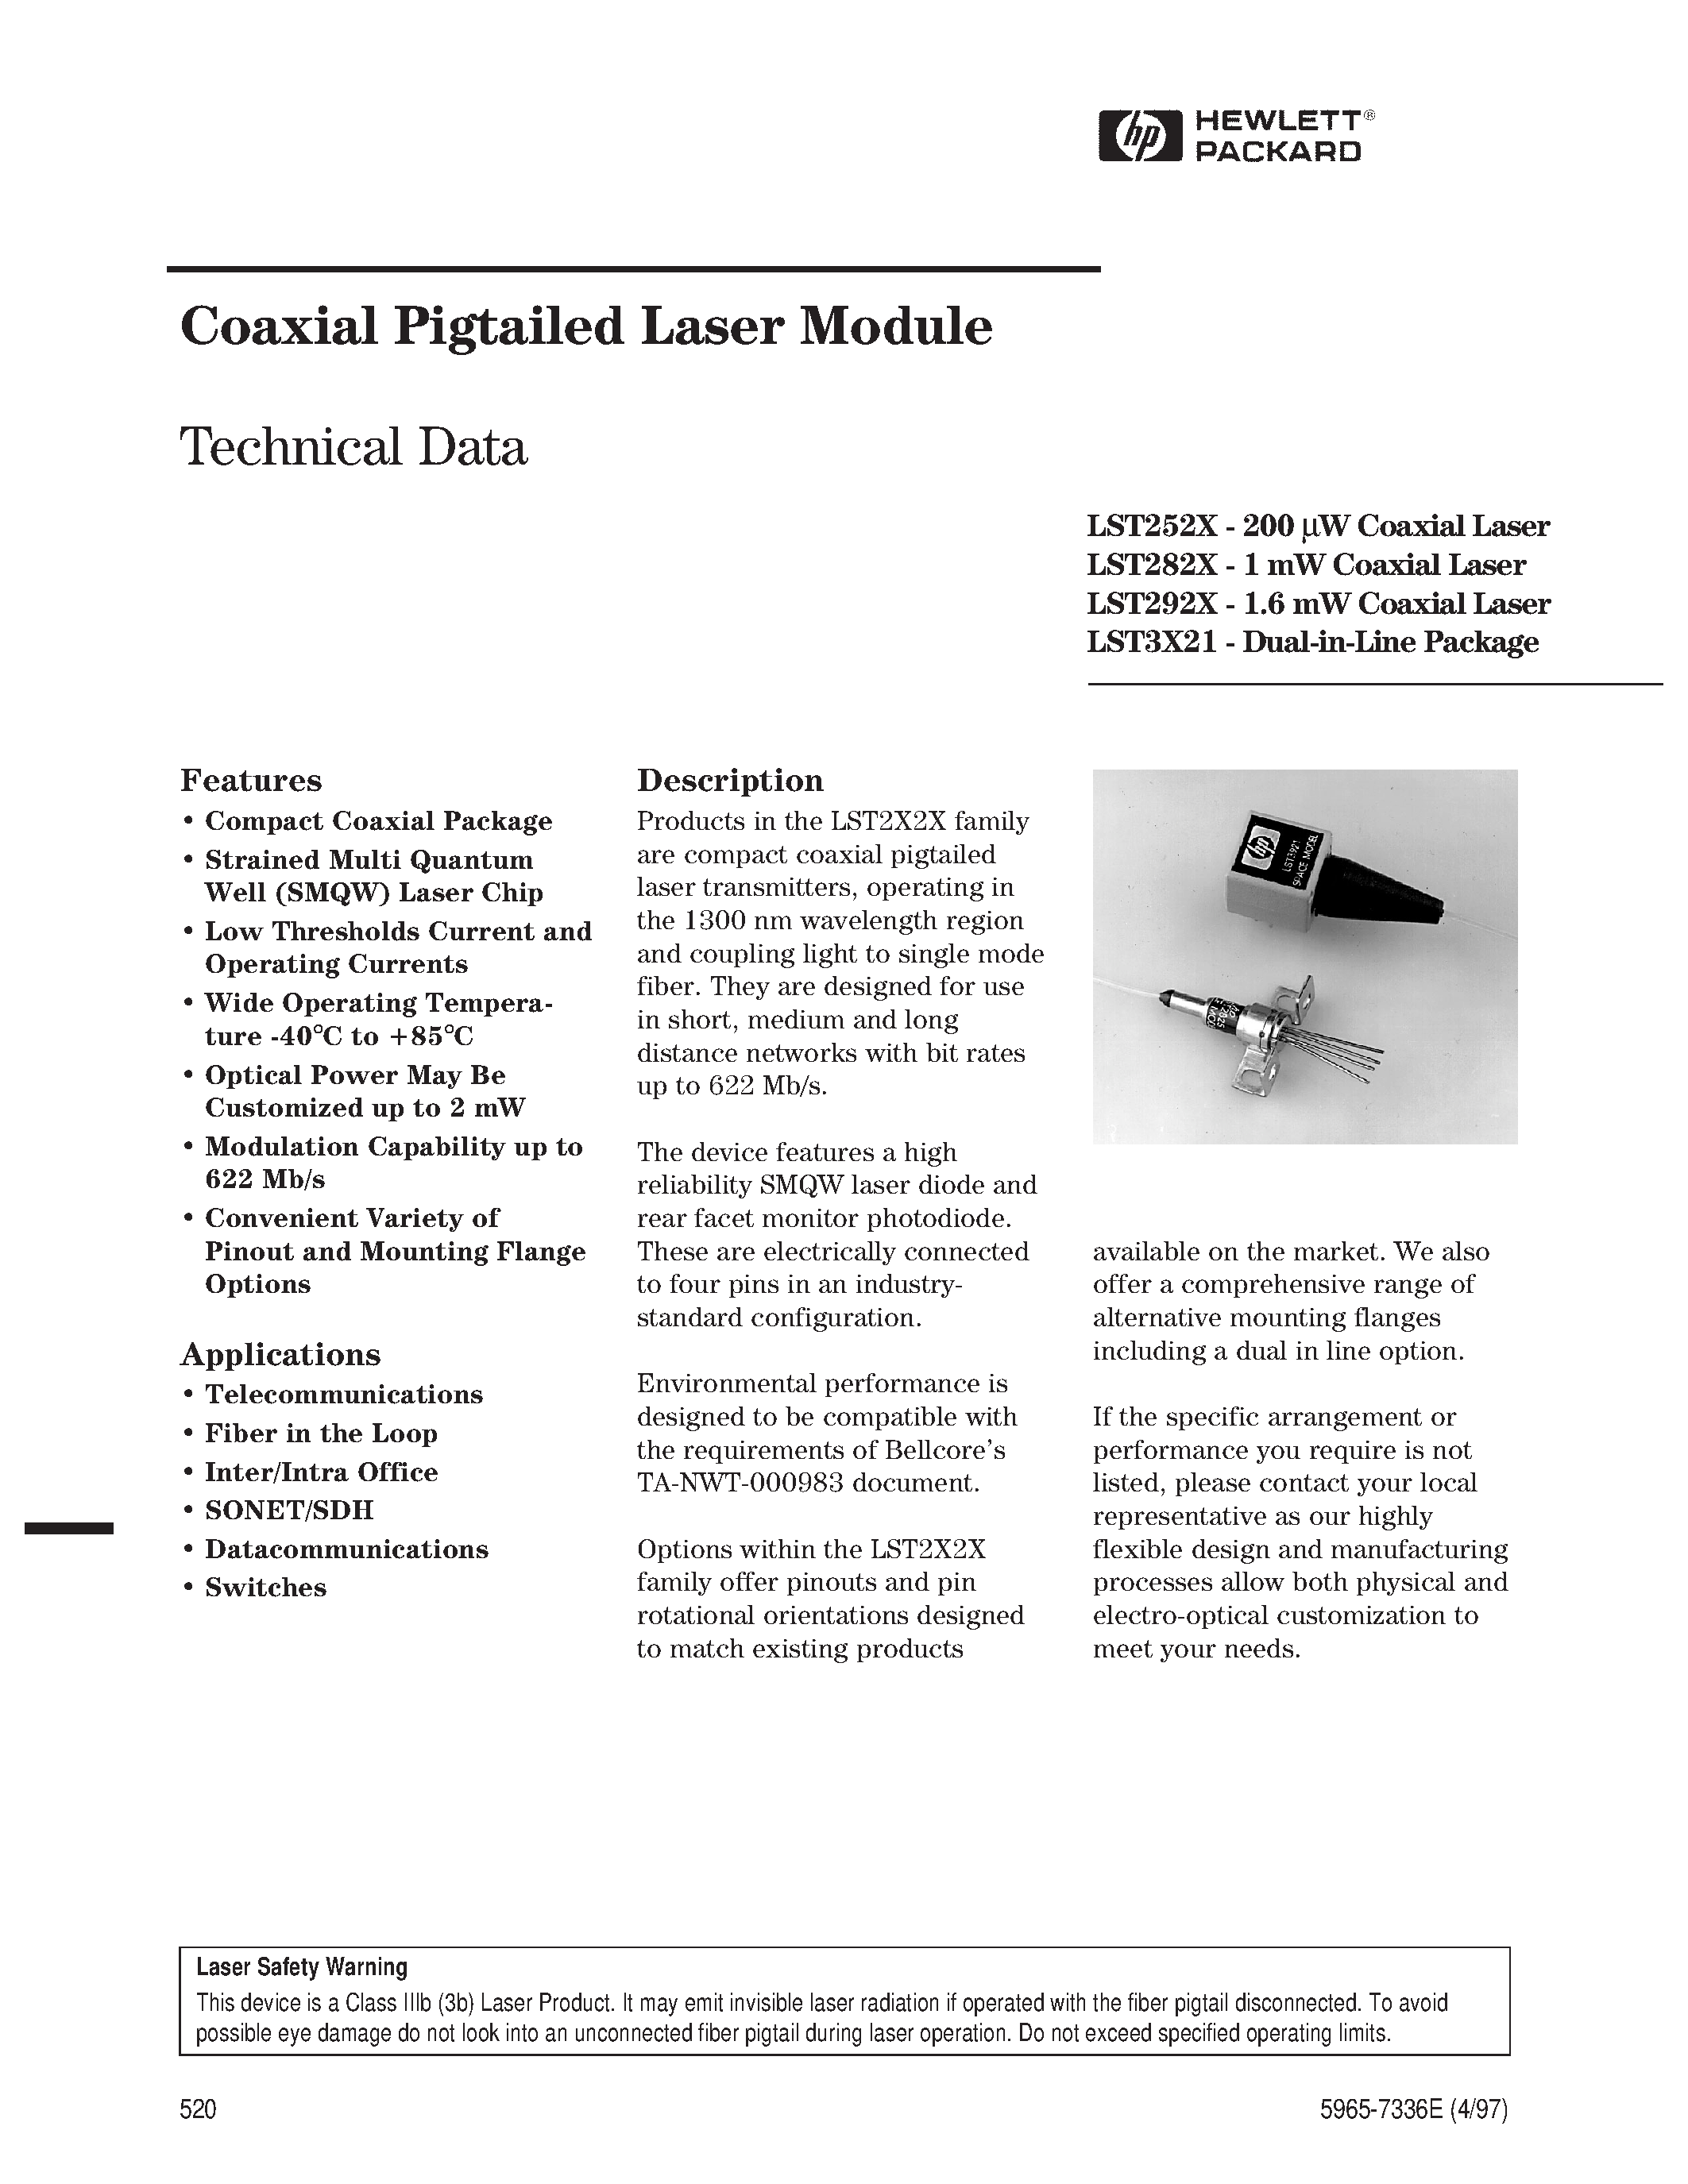 Даташит LST2927-S4-B-FP - Coaxial Pigtailed Laser Module страница 1